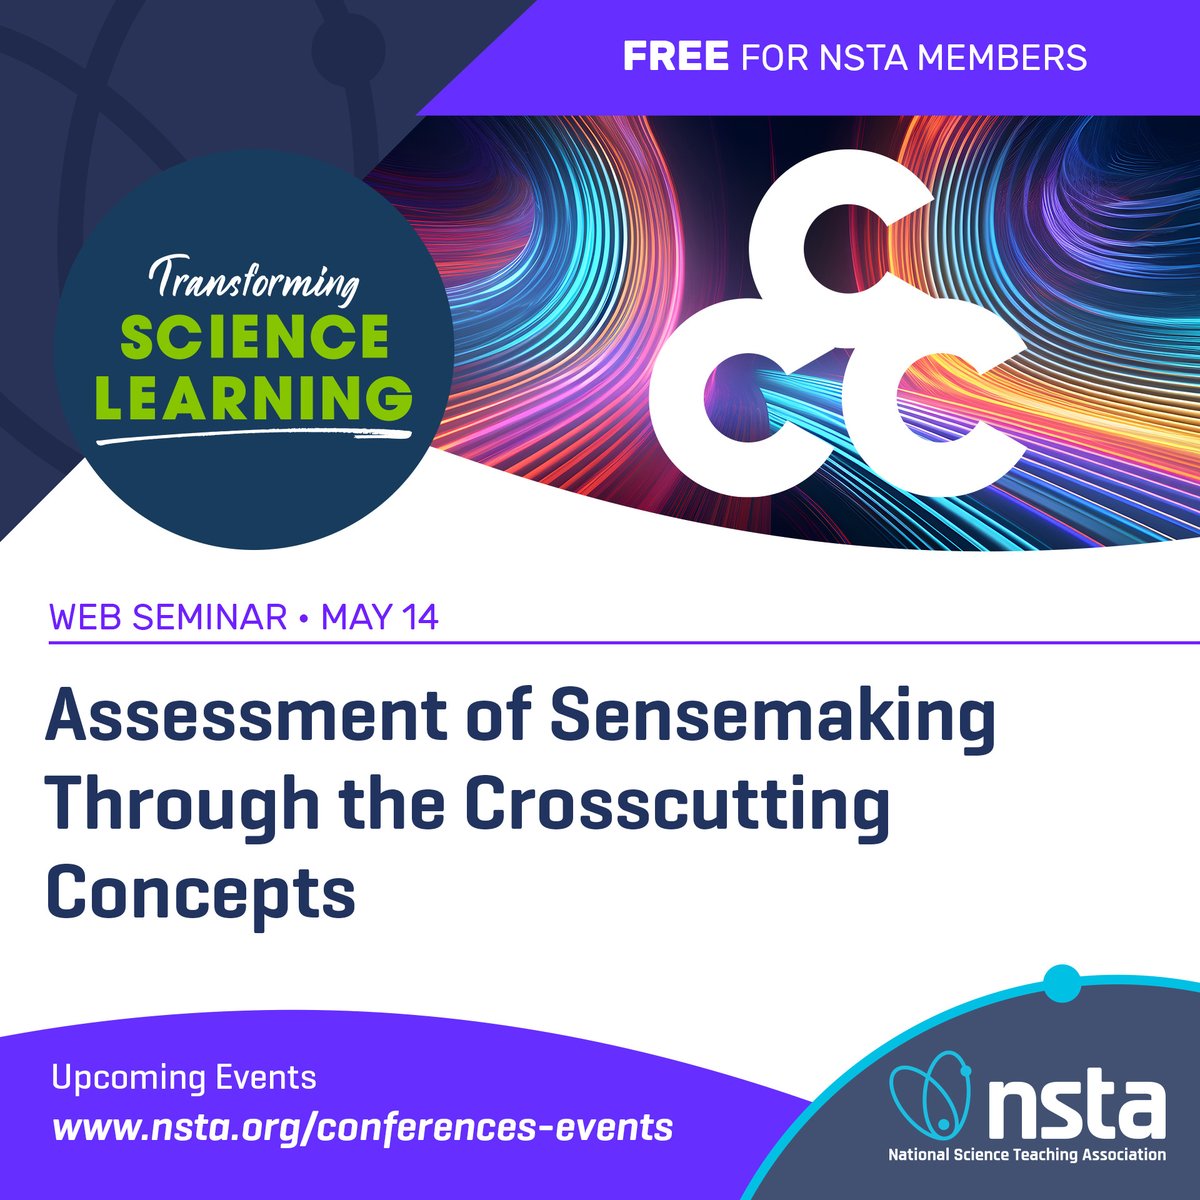 Join NSTA on Tuesday, May 14 at 7 PM ET for our final web seminar in the Crosscutting Concepts series! Explore HOW and WHY we use assessment to drive learning forward and reflect on next steps for instruction for student sensemaking. Learn more at: bit.ly/4buqLVs #SciEd